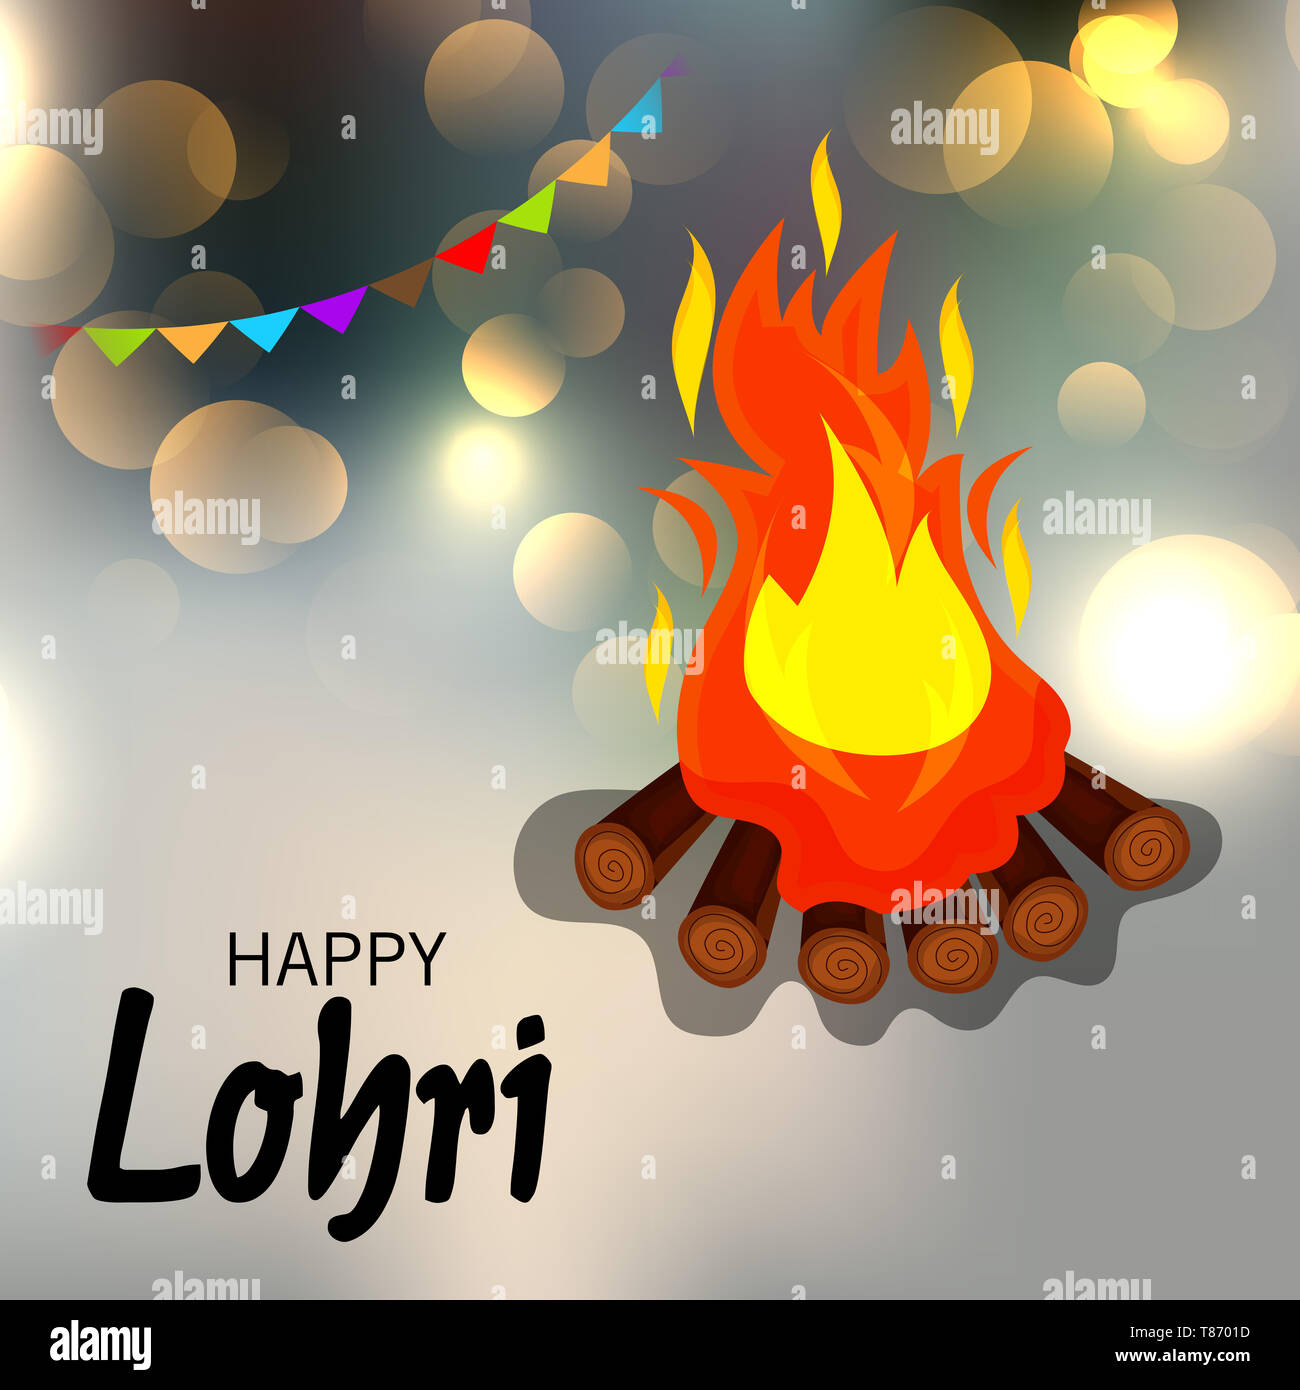 Vector illustration of a Background for Happy Lohri holiday Template for  Punjabi Festival Stock Photo - Alamy